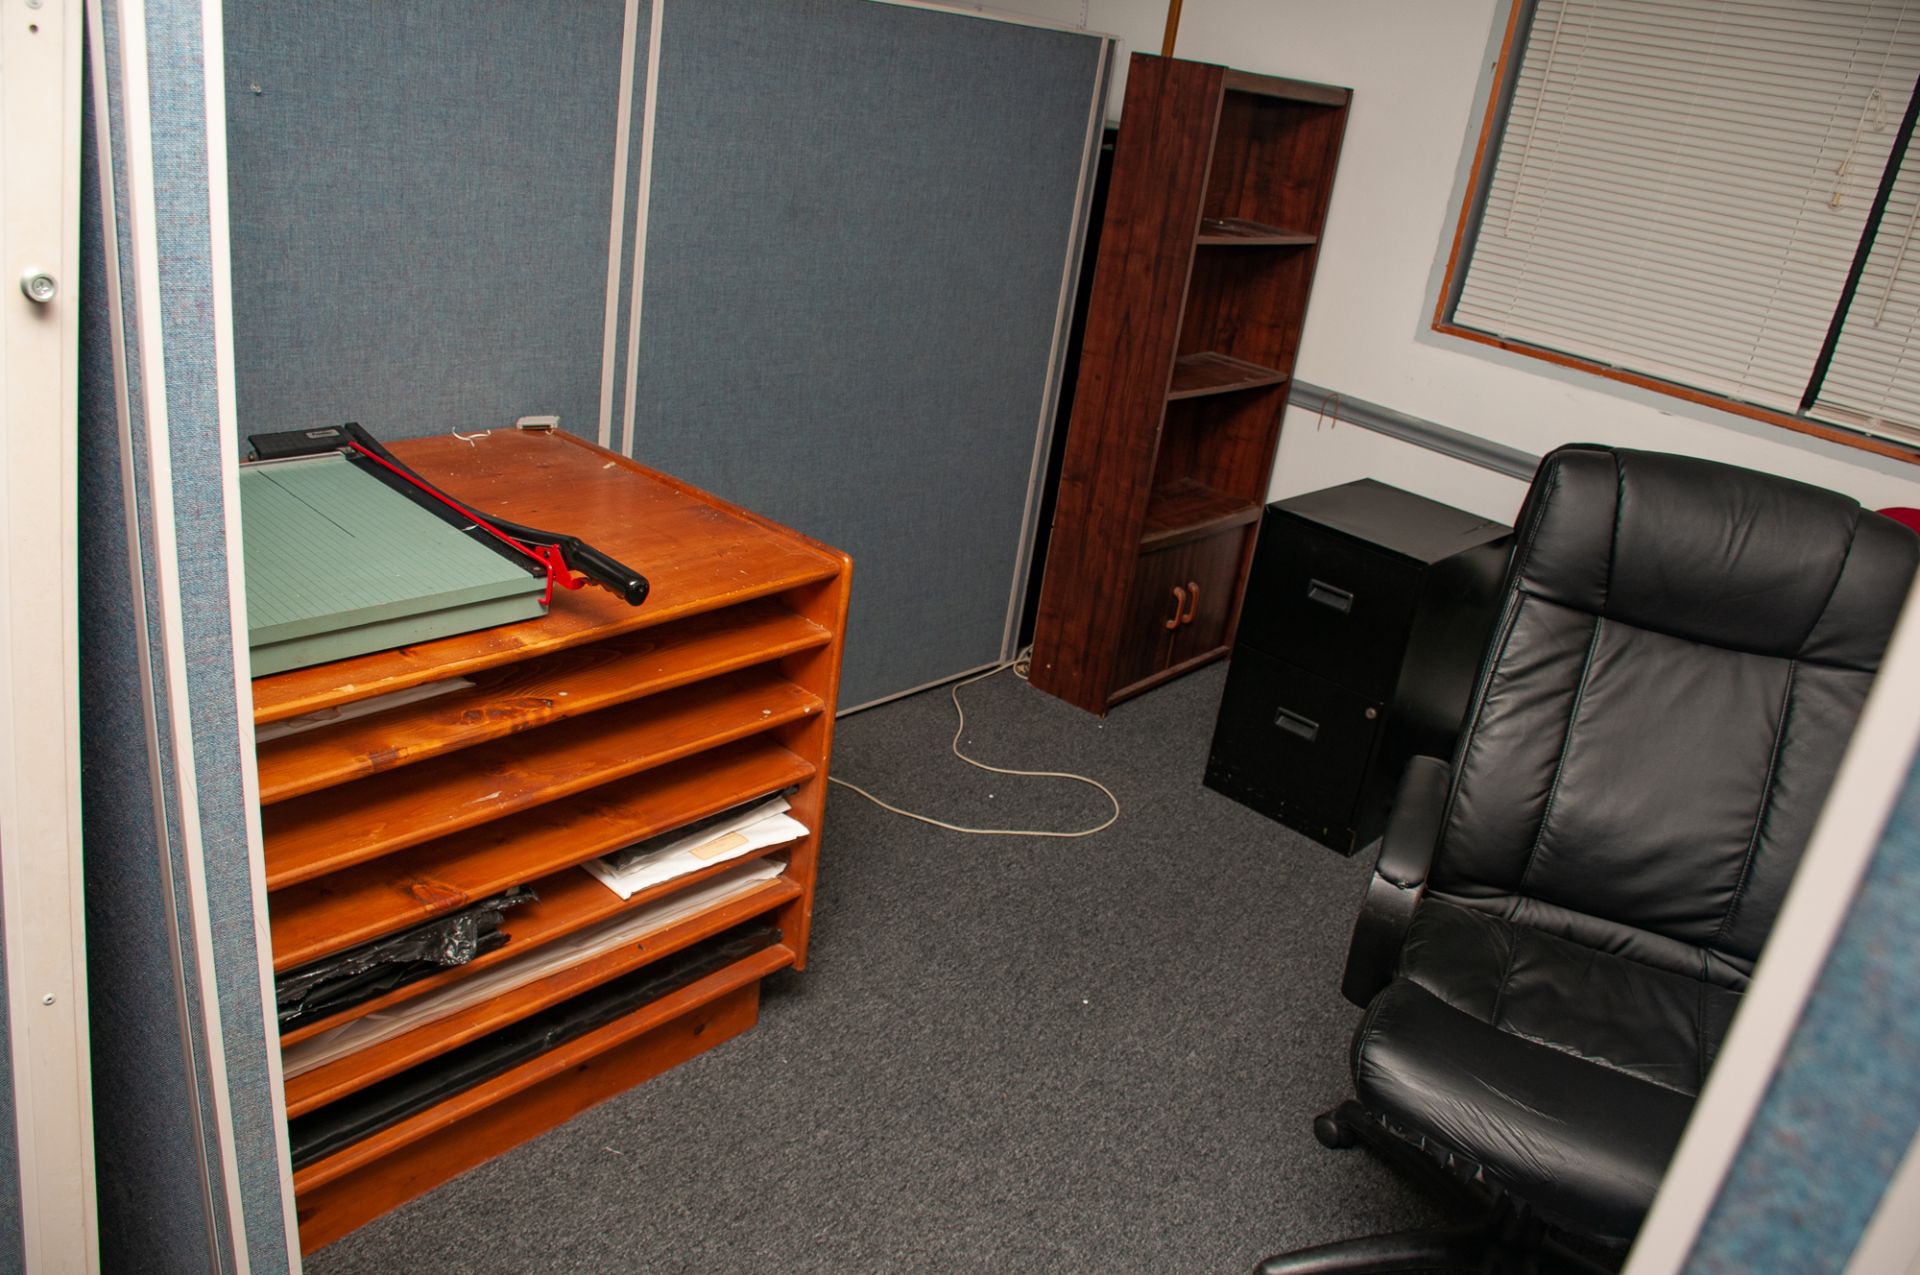 Office Furniture On Second Floor Front of Building, Microwave, Refridgerator, Desks Chairs, Filing C - Image 24 of 37